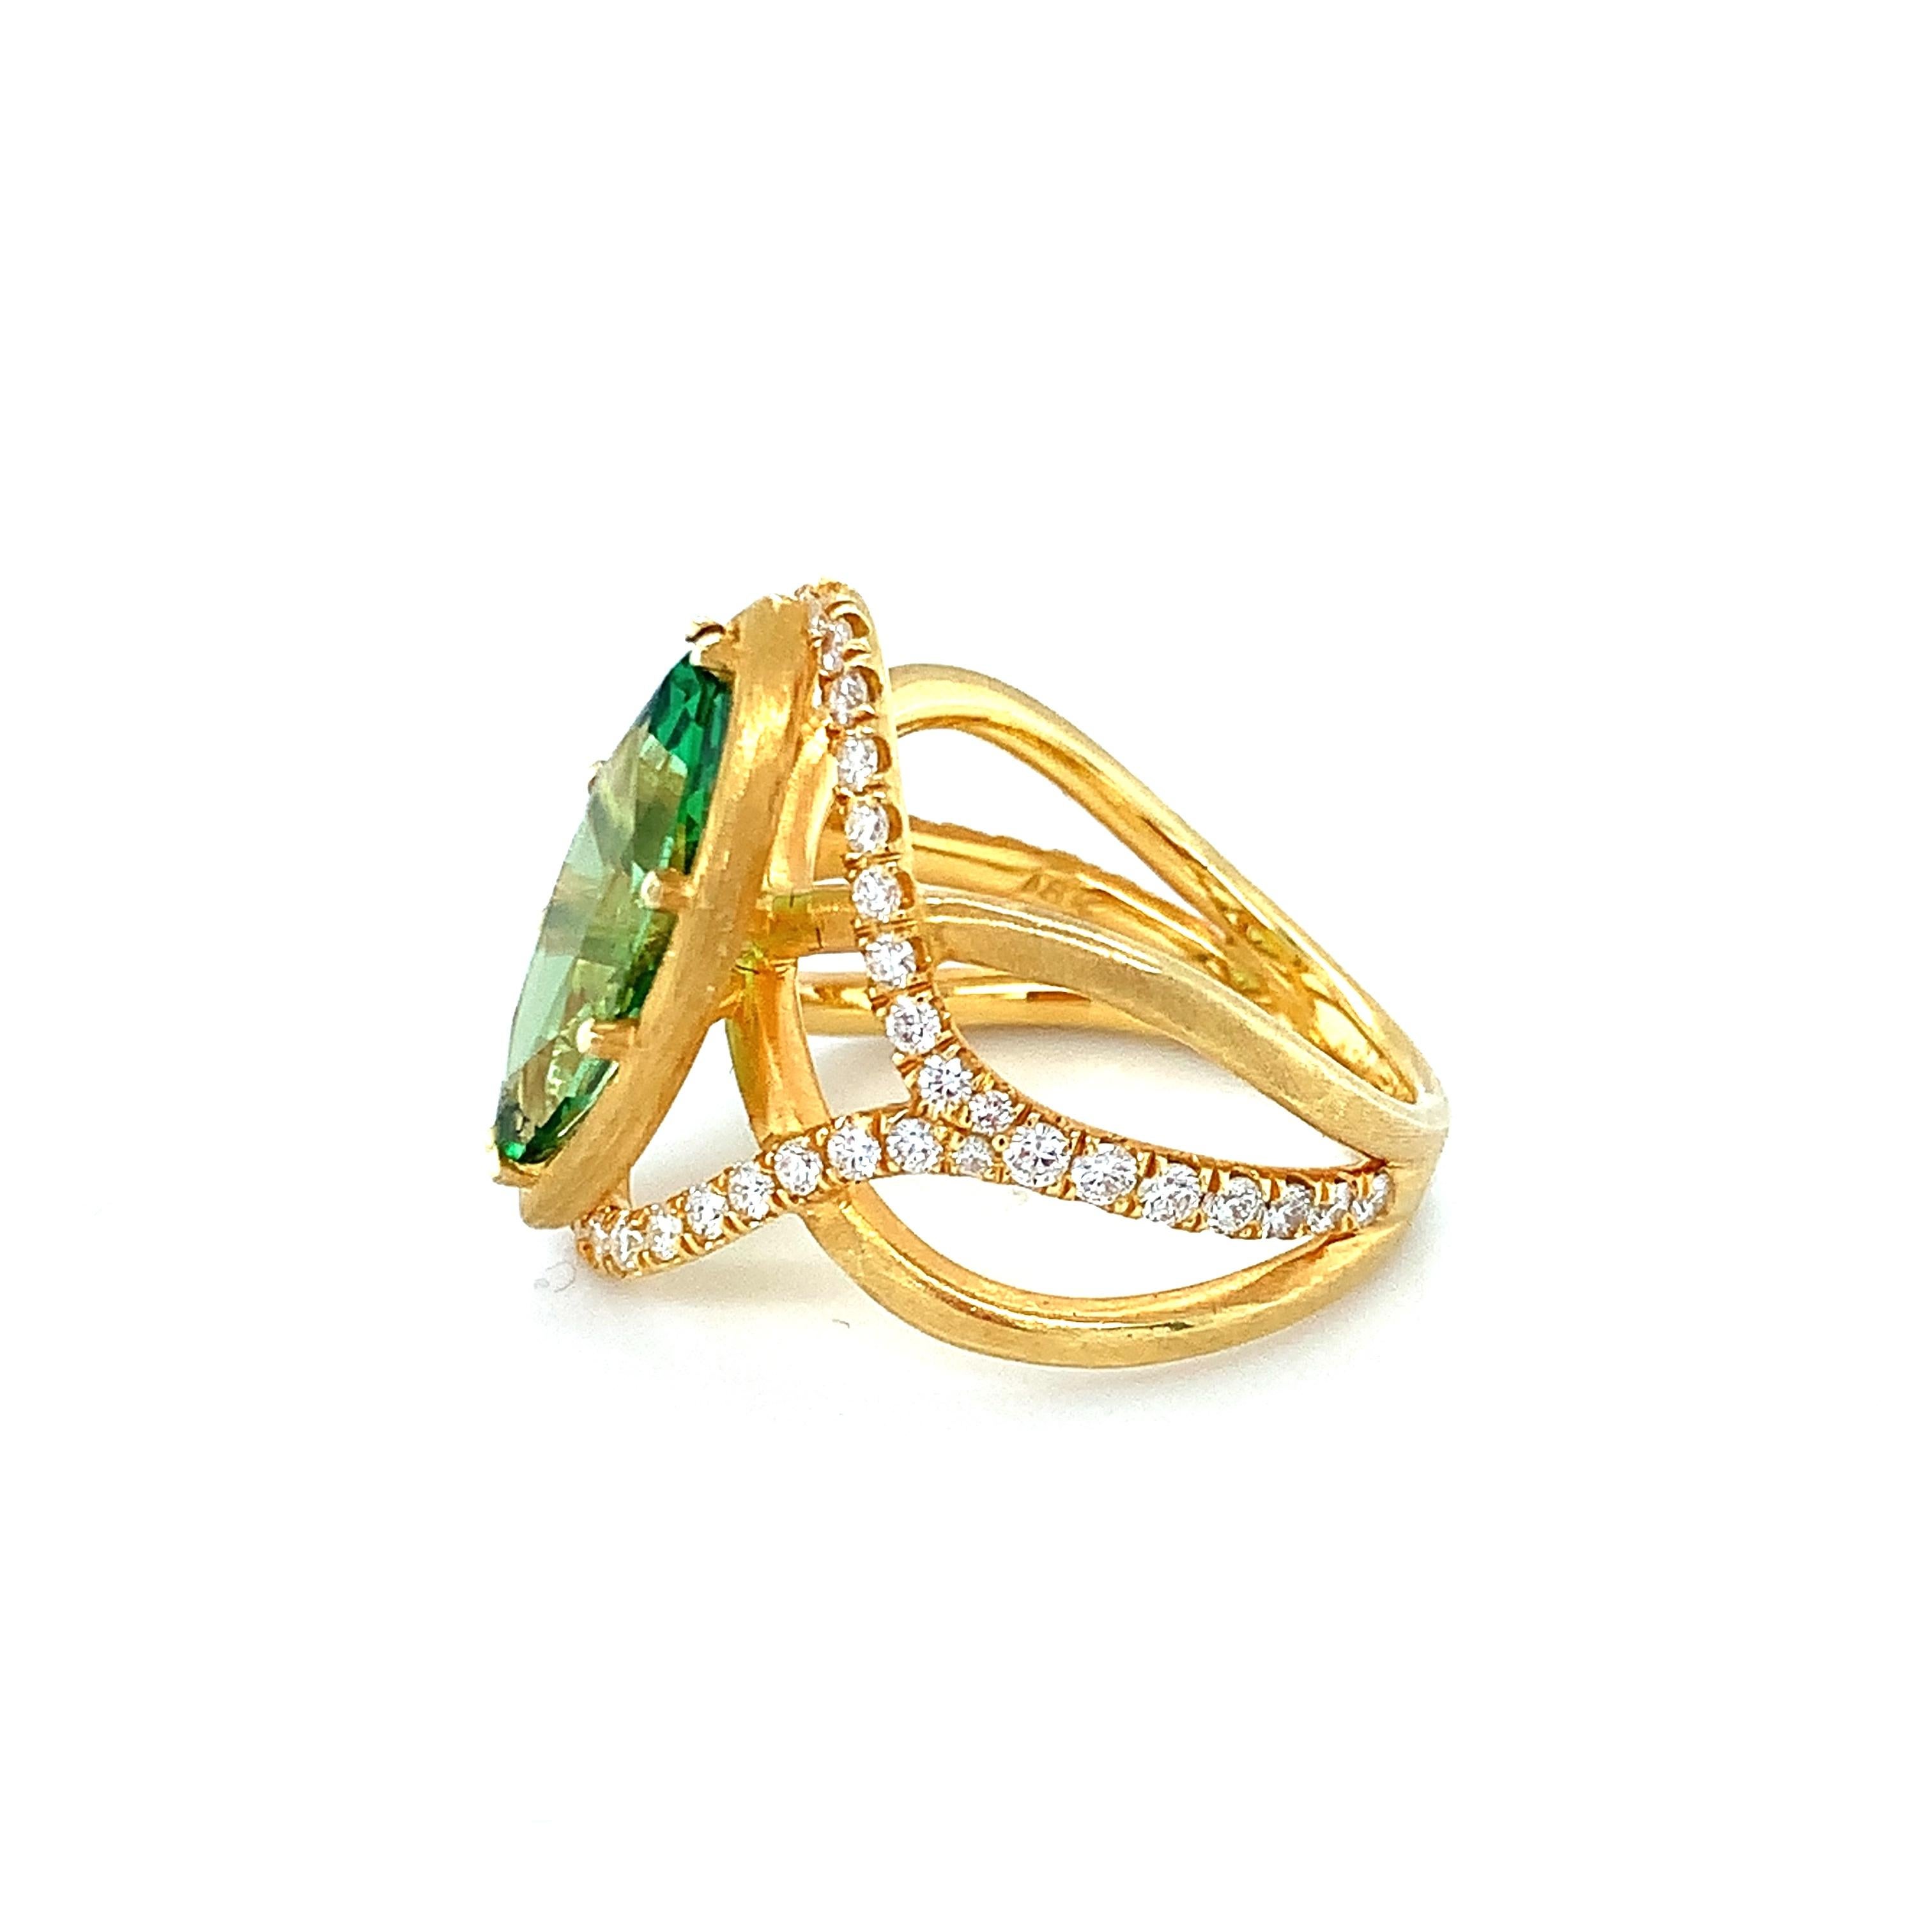 Tsavorite Garnet and Diamond Cocktail Ring in Yellow Gold, 2.95 Carats For Sale 1